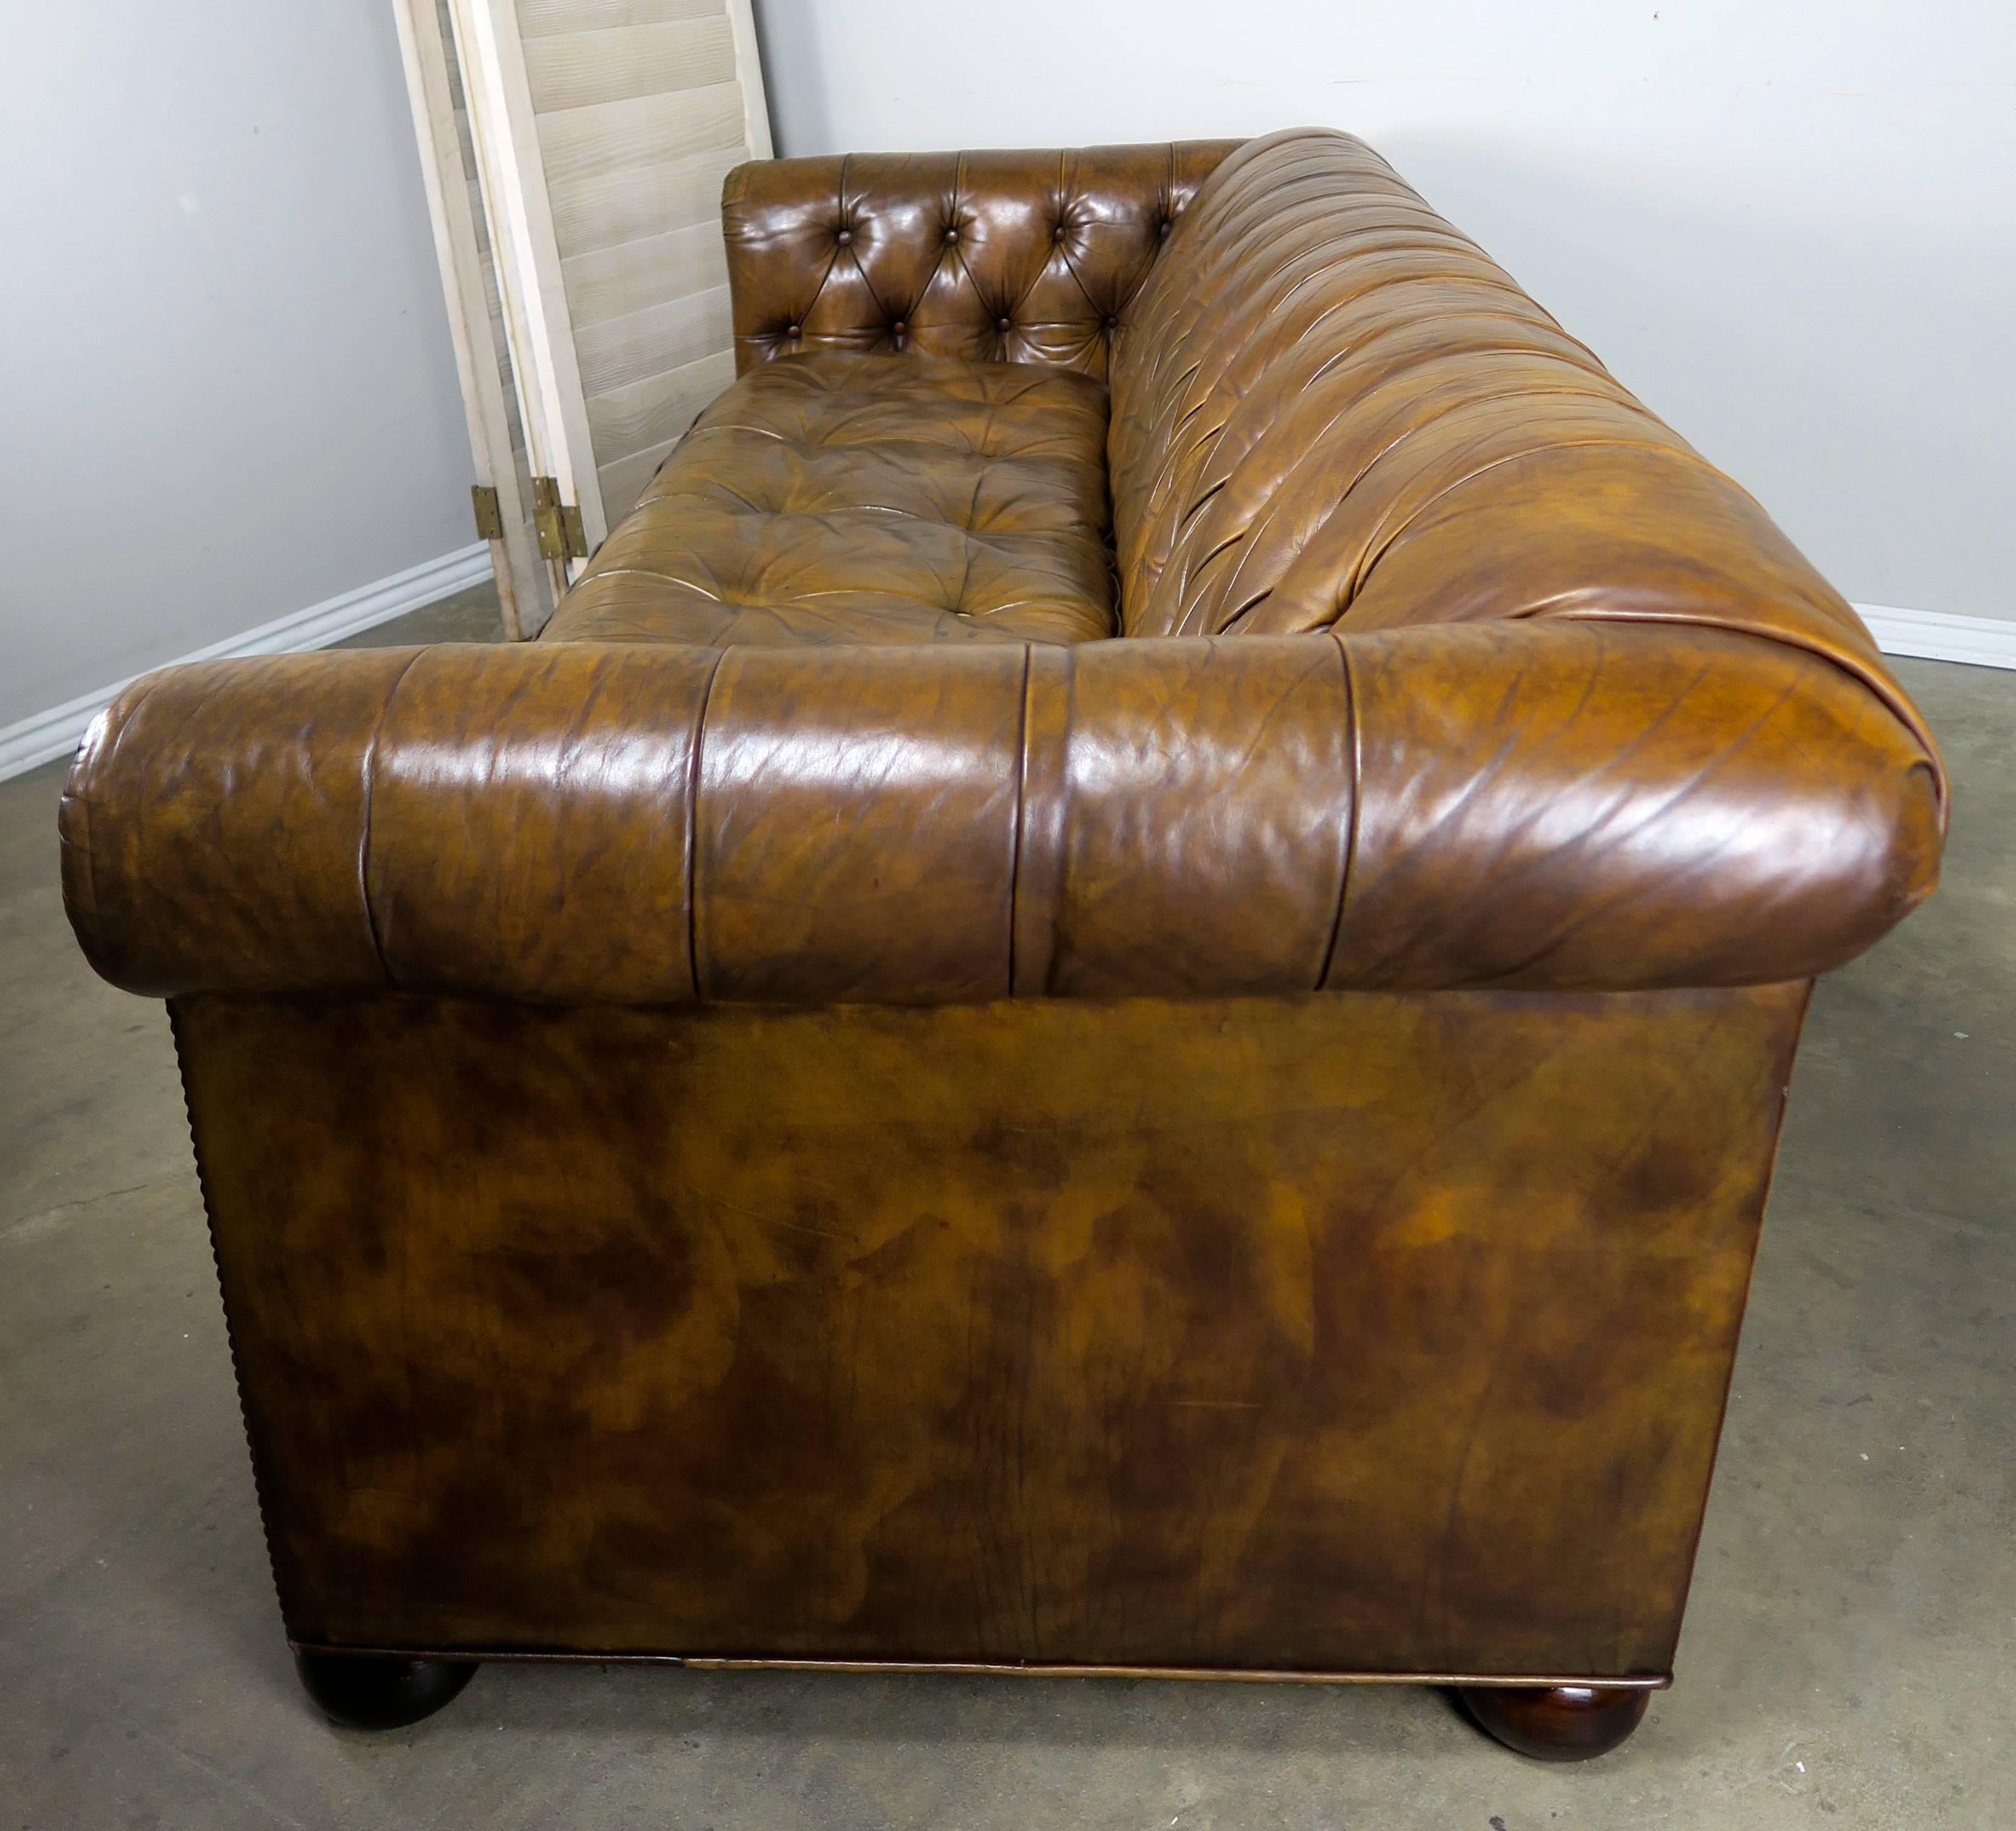 Rich brown English tufted leather Chesterfield style sofa standing on six ebonized bun feet and finished with nailhead trim detail. Beautiful worn leather. Single leather tufted seat cushion. Seat height 17.5